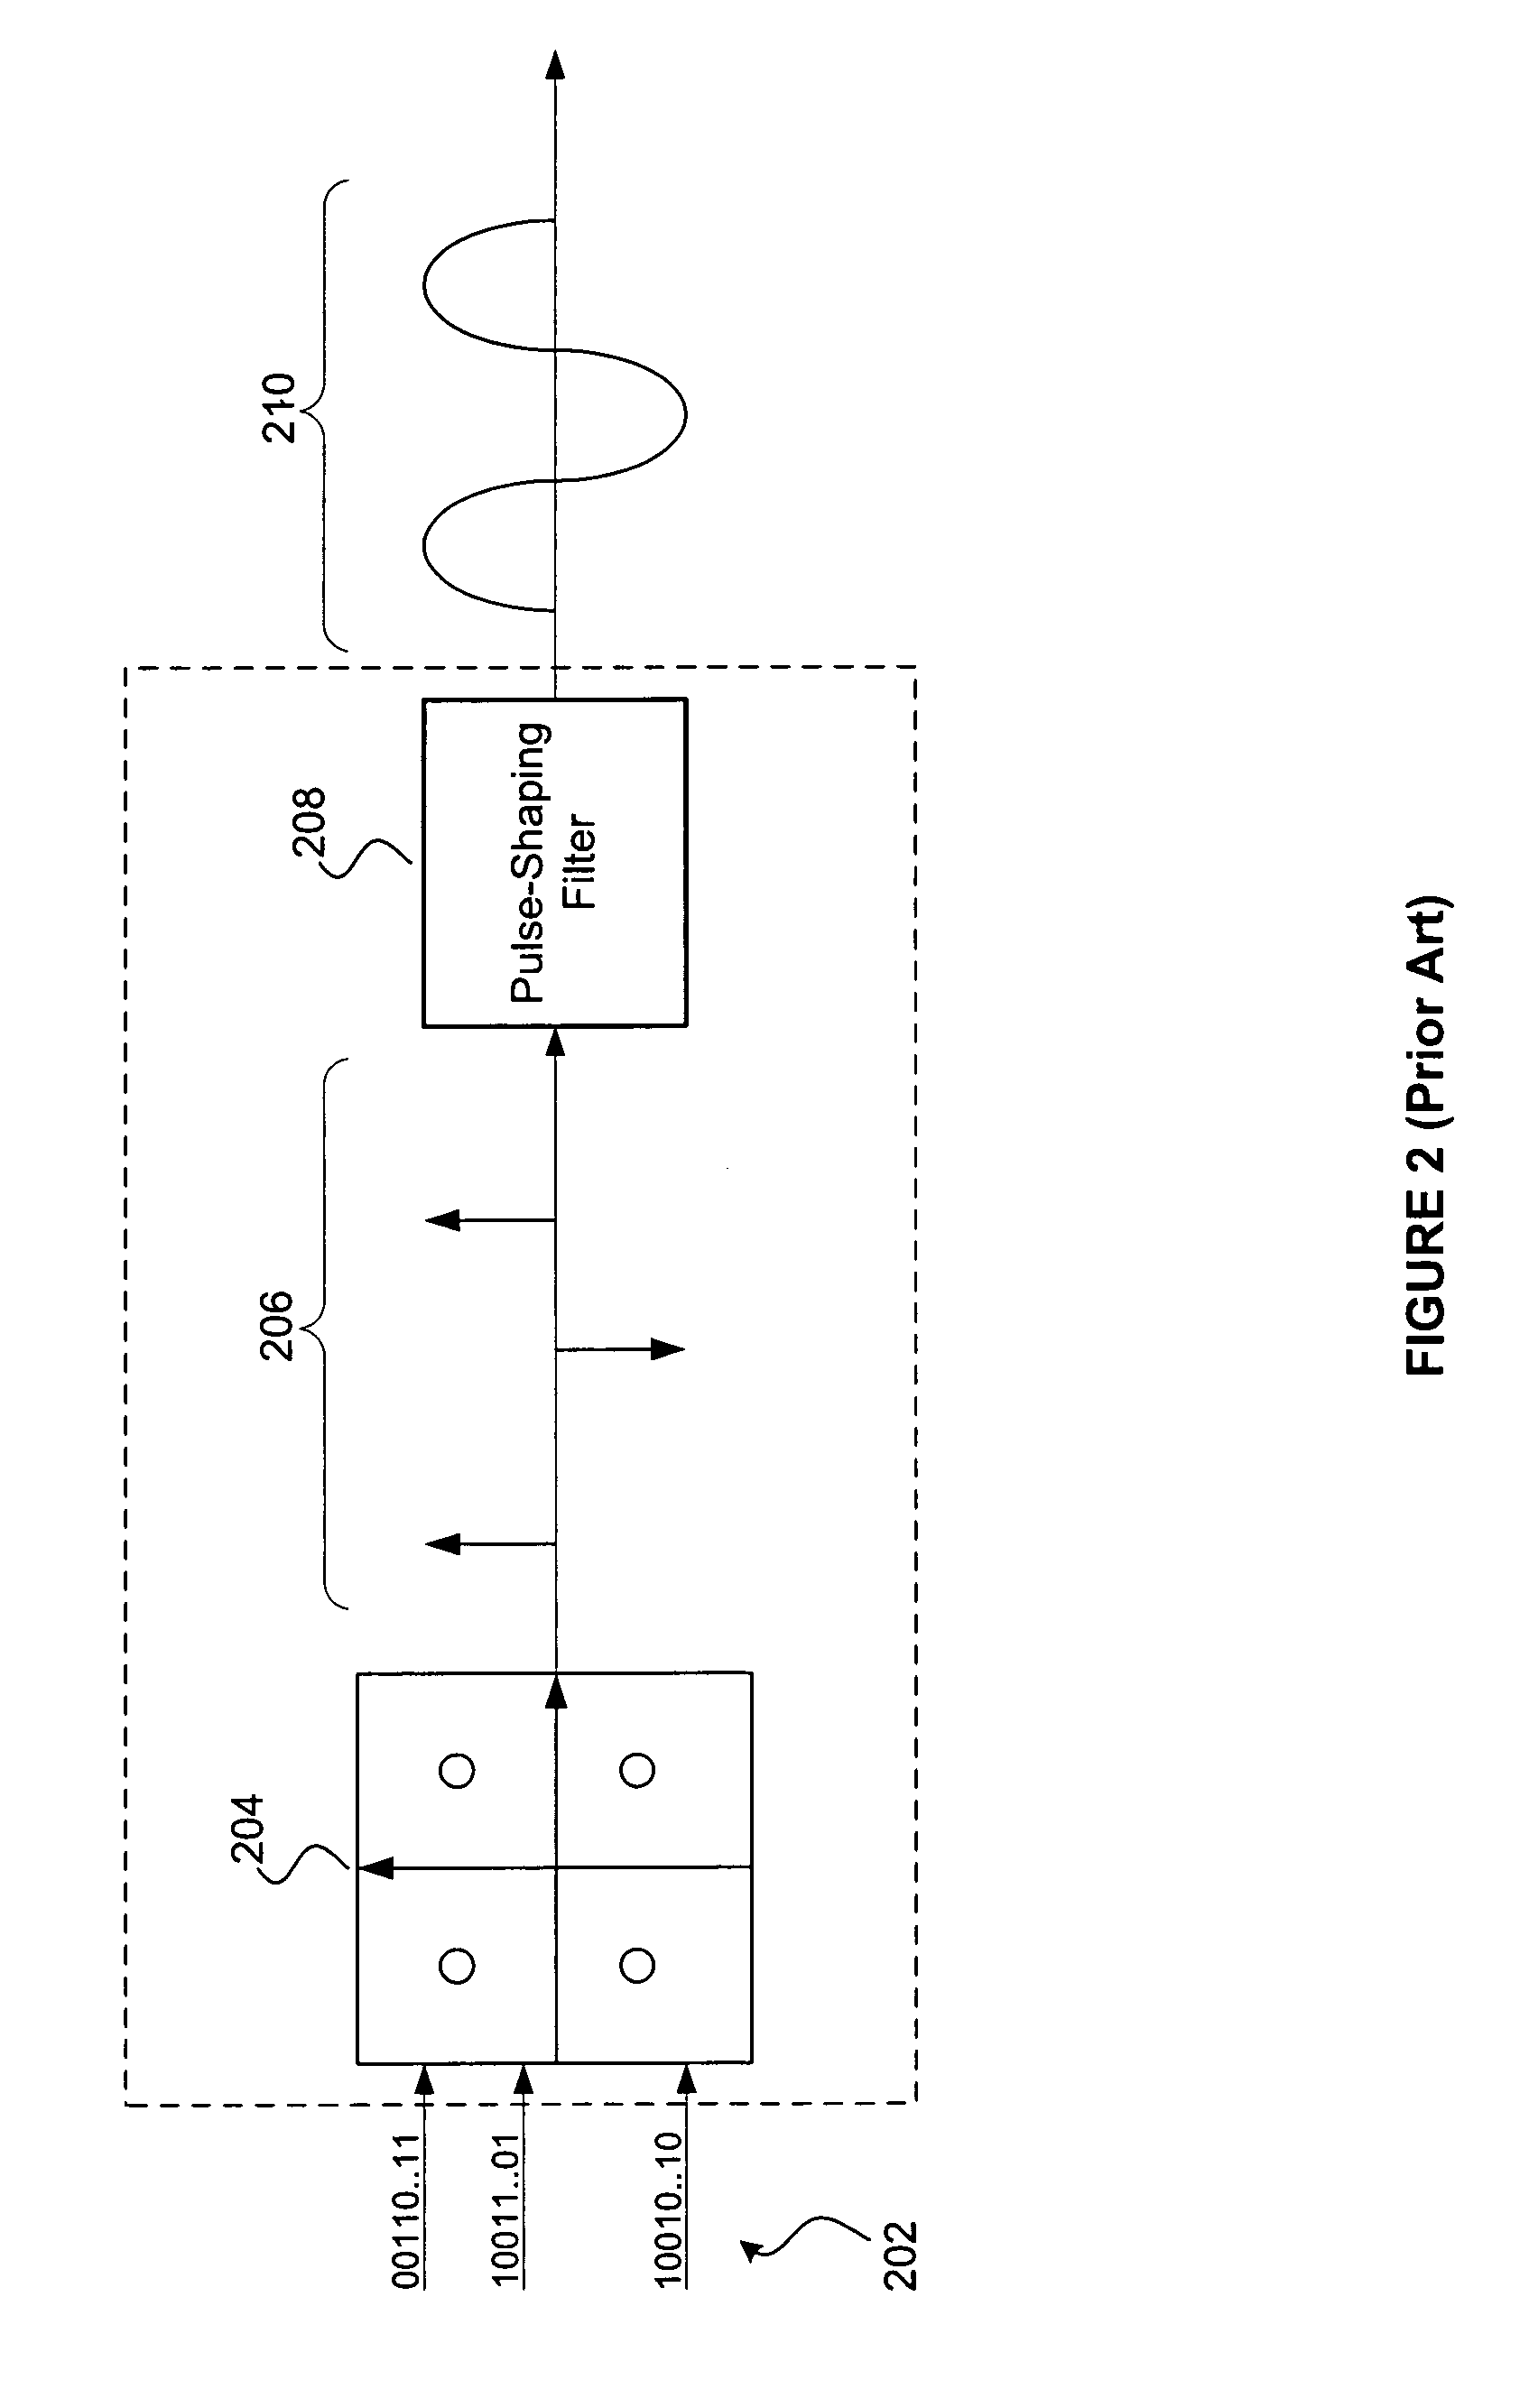 Method and Apparatus for Pulse Optimization for Hardware Implementation